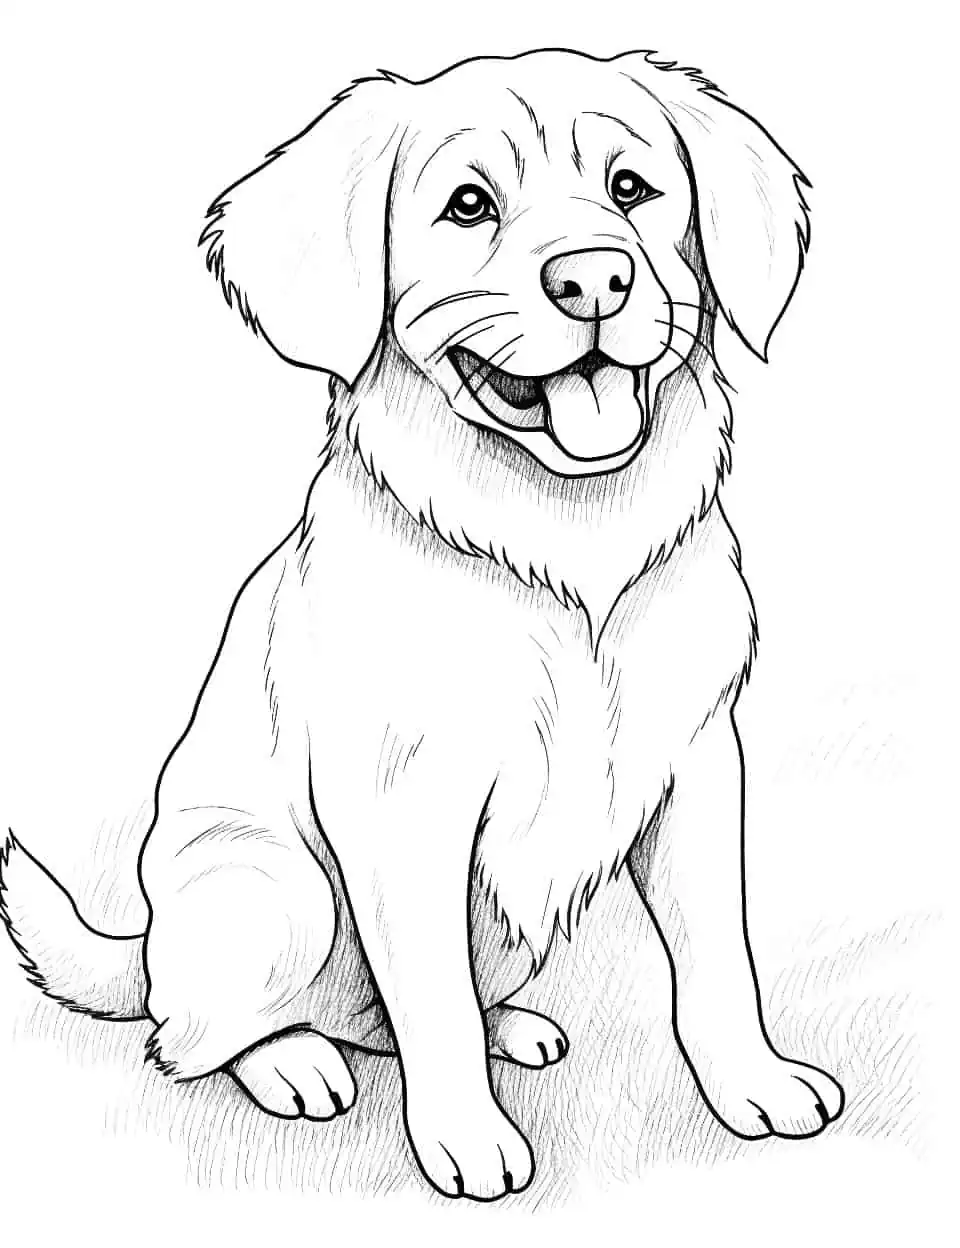 Dog Drawing of a Golden Retriever Coloring Page - A beautiful, artistic drawing of a Golden Retriever for kids to color.